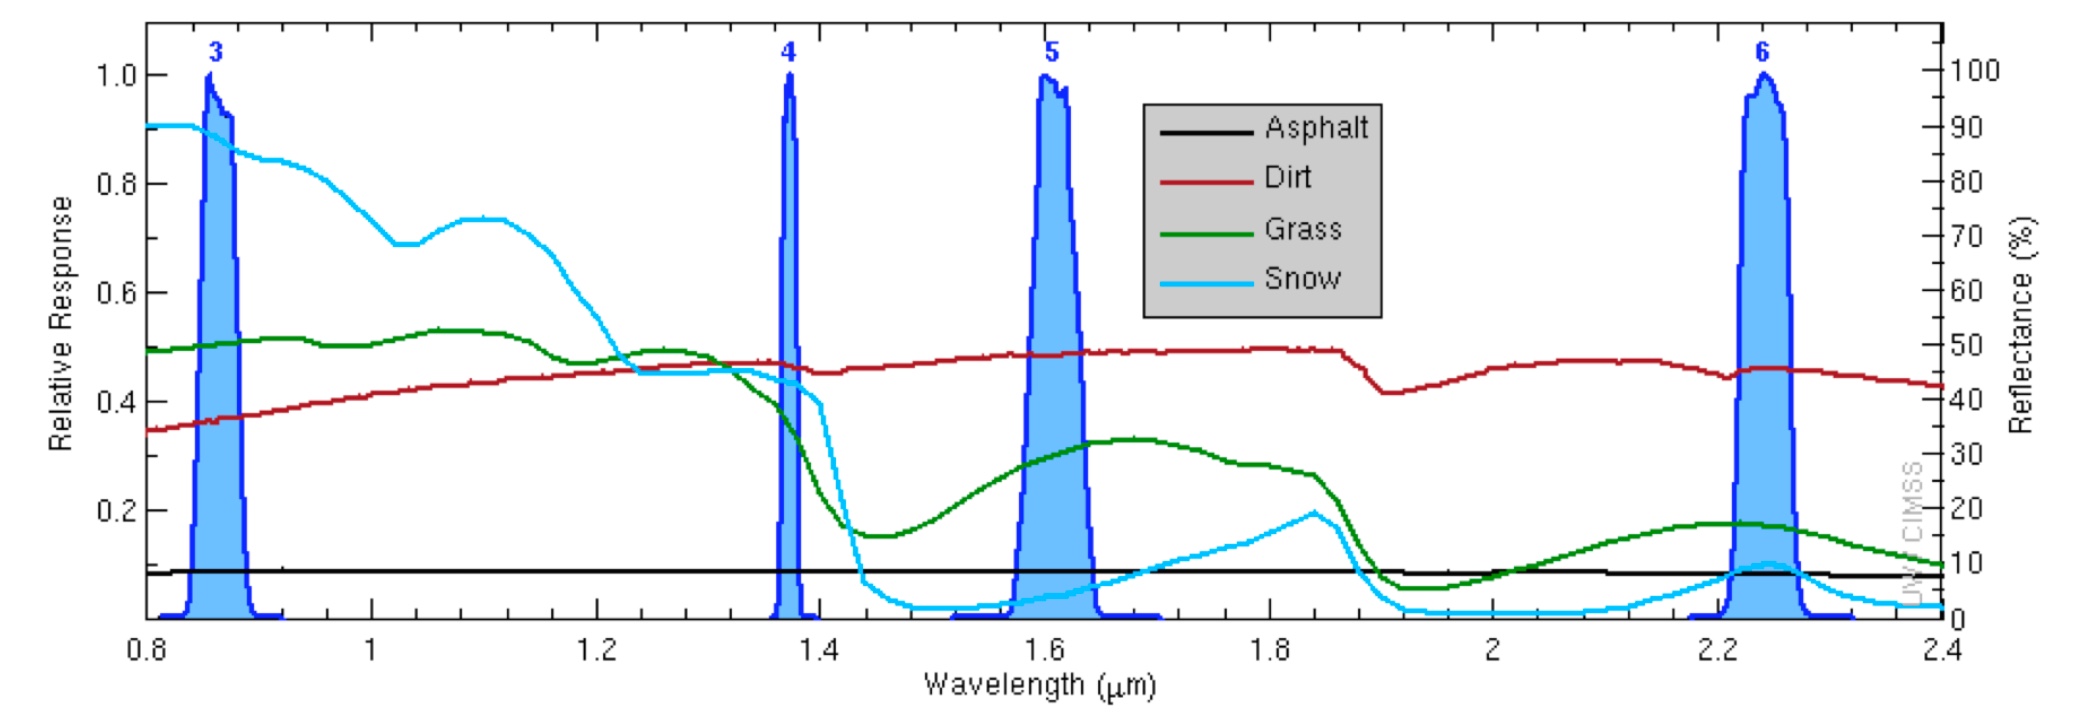 Spectral Response Functions for GOES-16 ABI Bands 3, 4, 5 and 6, along with the reflectance of asphalt, dirt, grass and snow [click to enlarge]